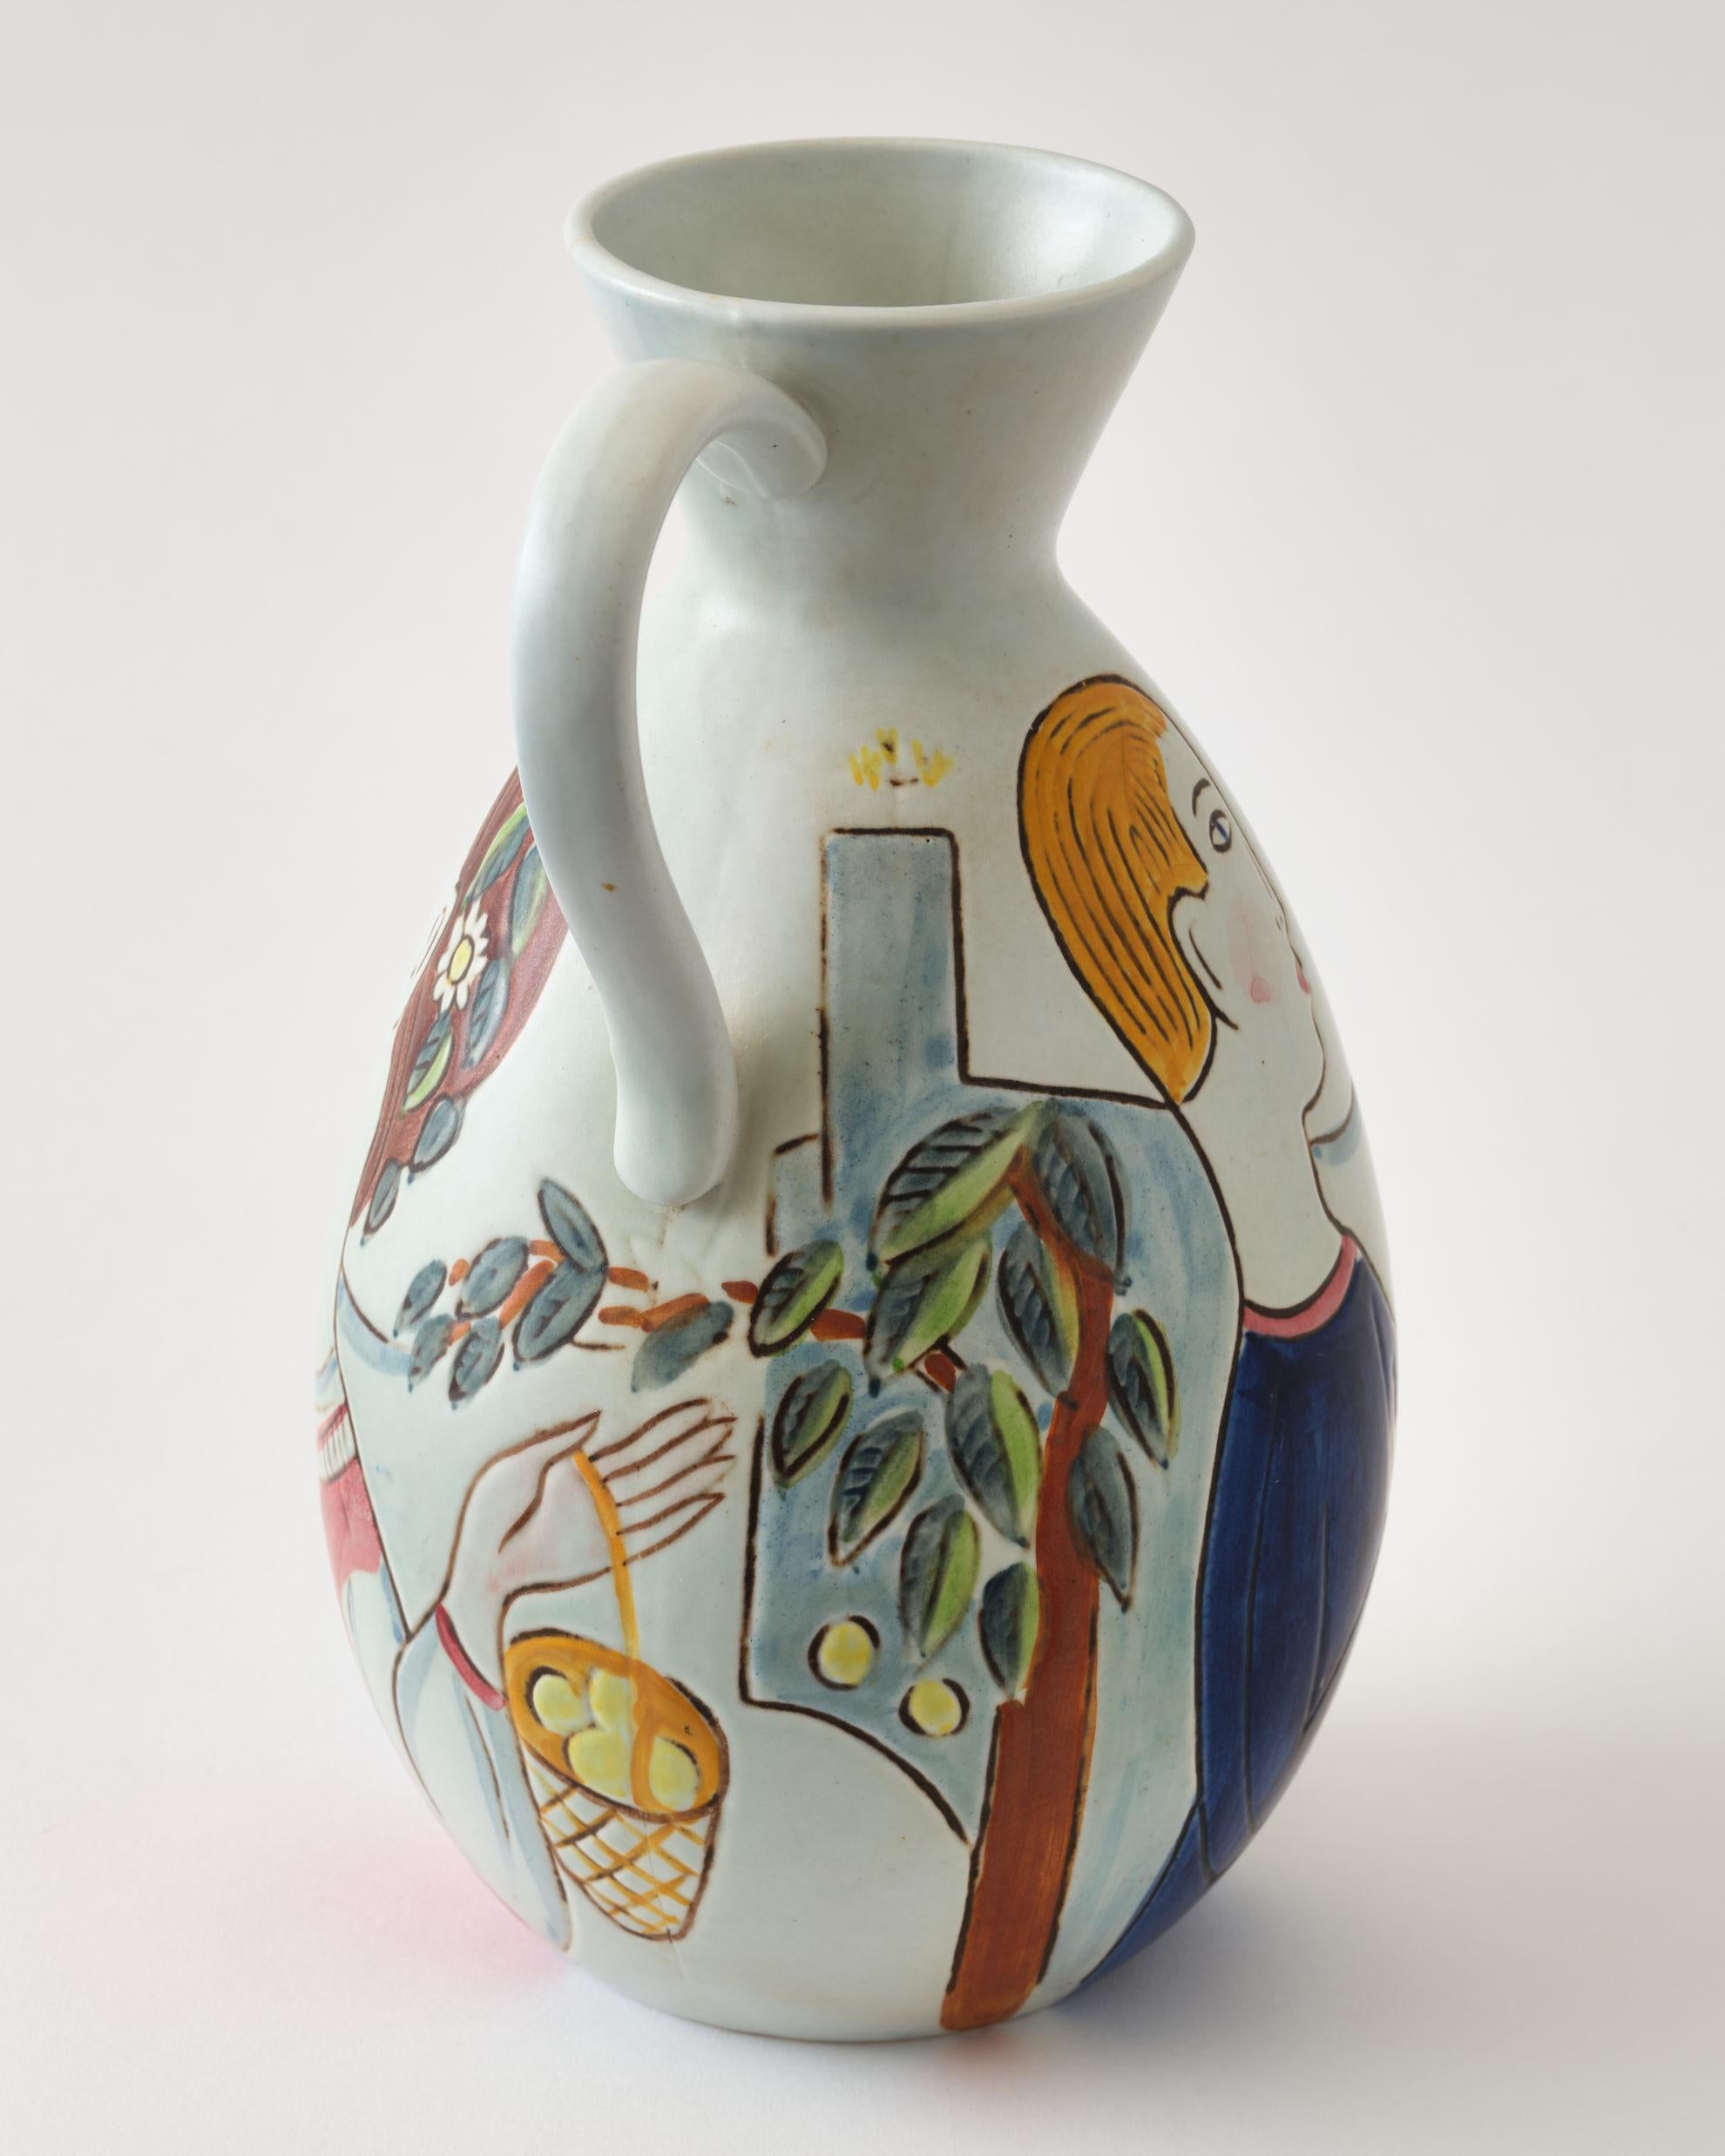 Swedish Ceramic Vase by C-H Stalhane, Sweden, Woman & Man Painted, Multi Colors, C 1950 For Sale